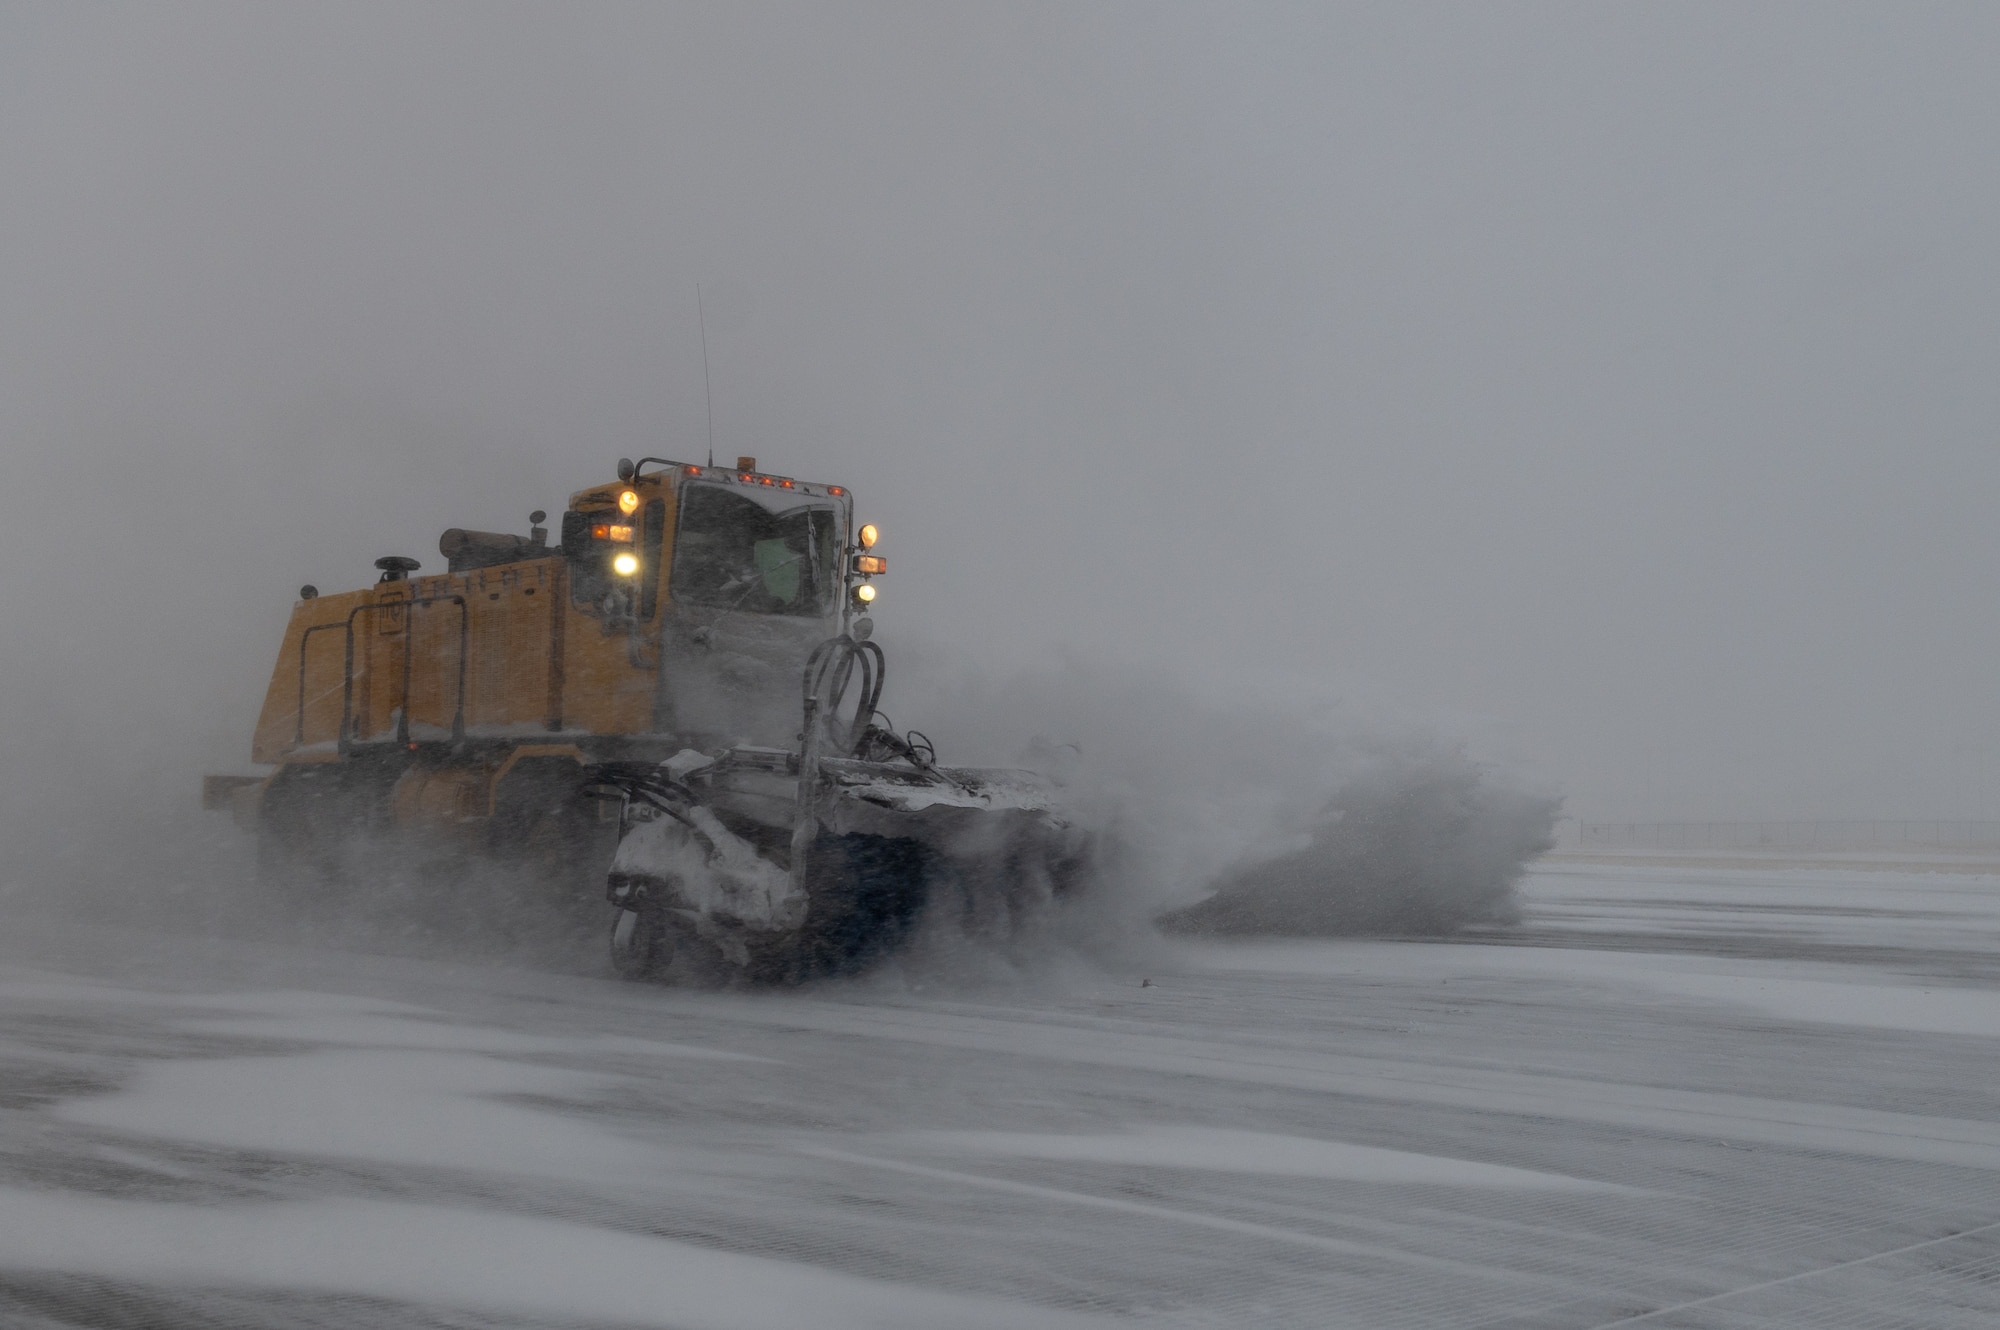 The 22nd Civil Engineering Squadron’s snow removal team clears snow from the flight line Feb. 17, 2022, at McConnell Air Force Base, Kansas.